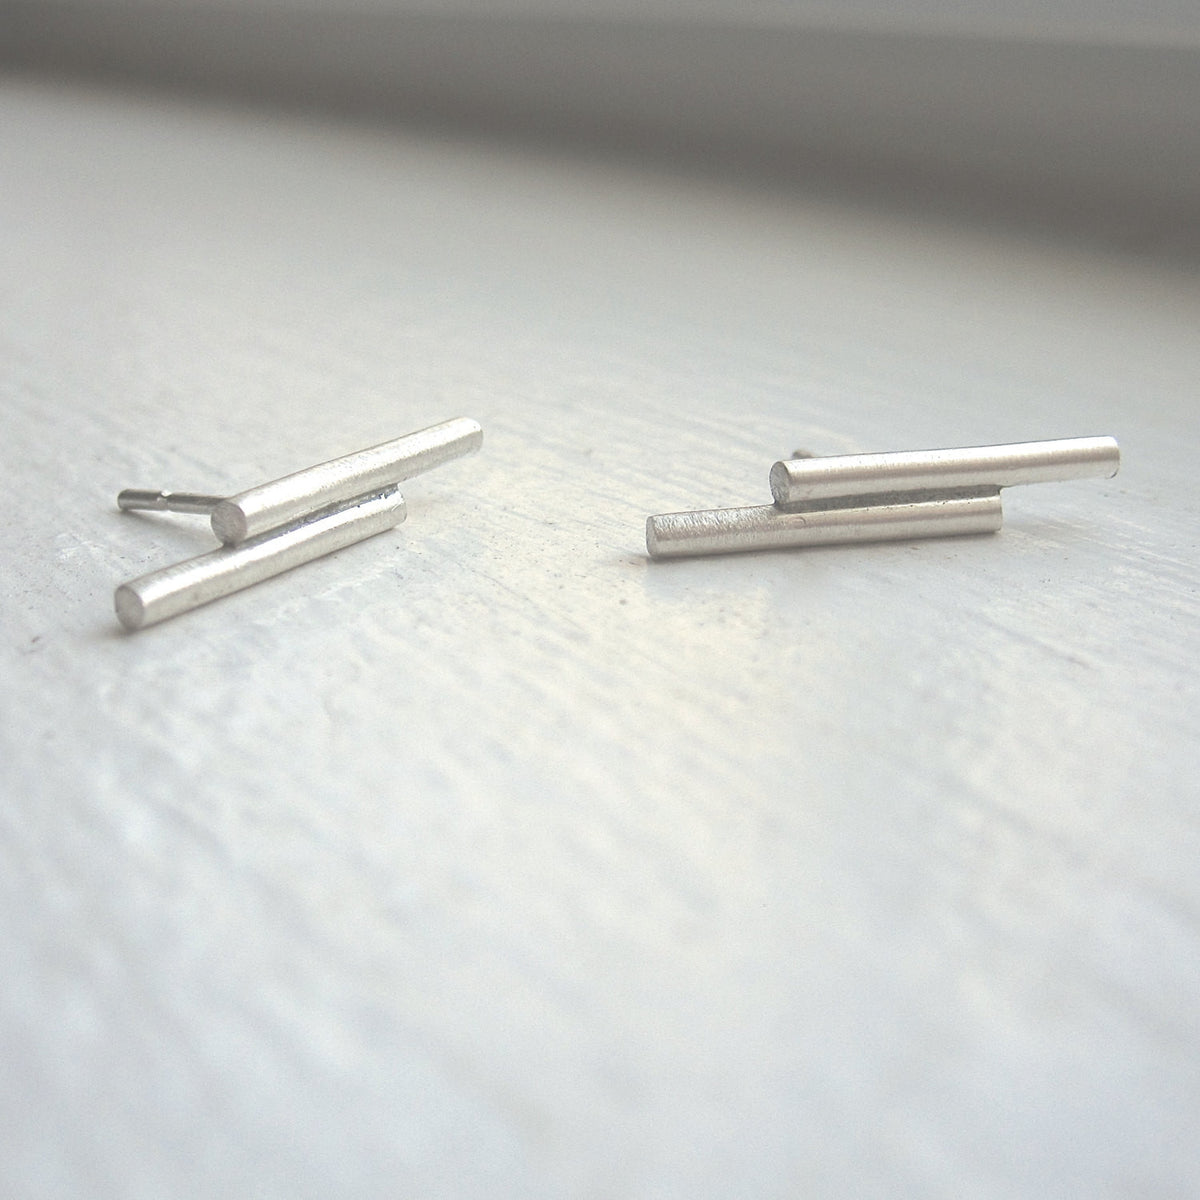 Simple and Modern Double Round Bar, Stick Earrings - 0288 - Virginia Wynne Designs